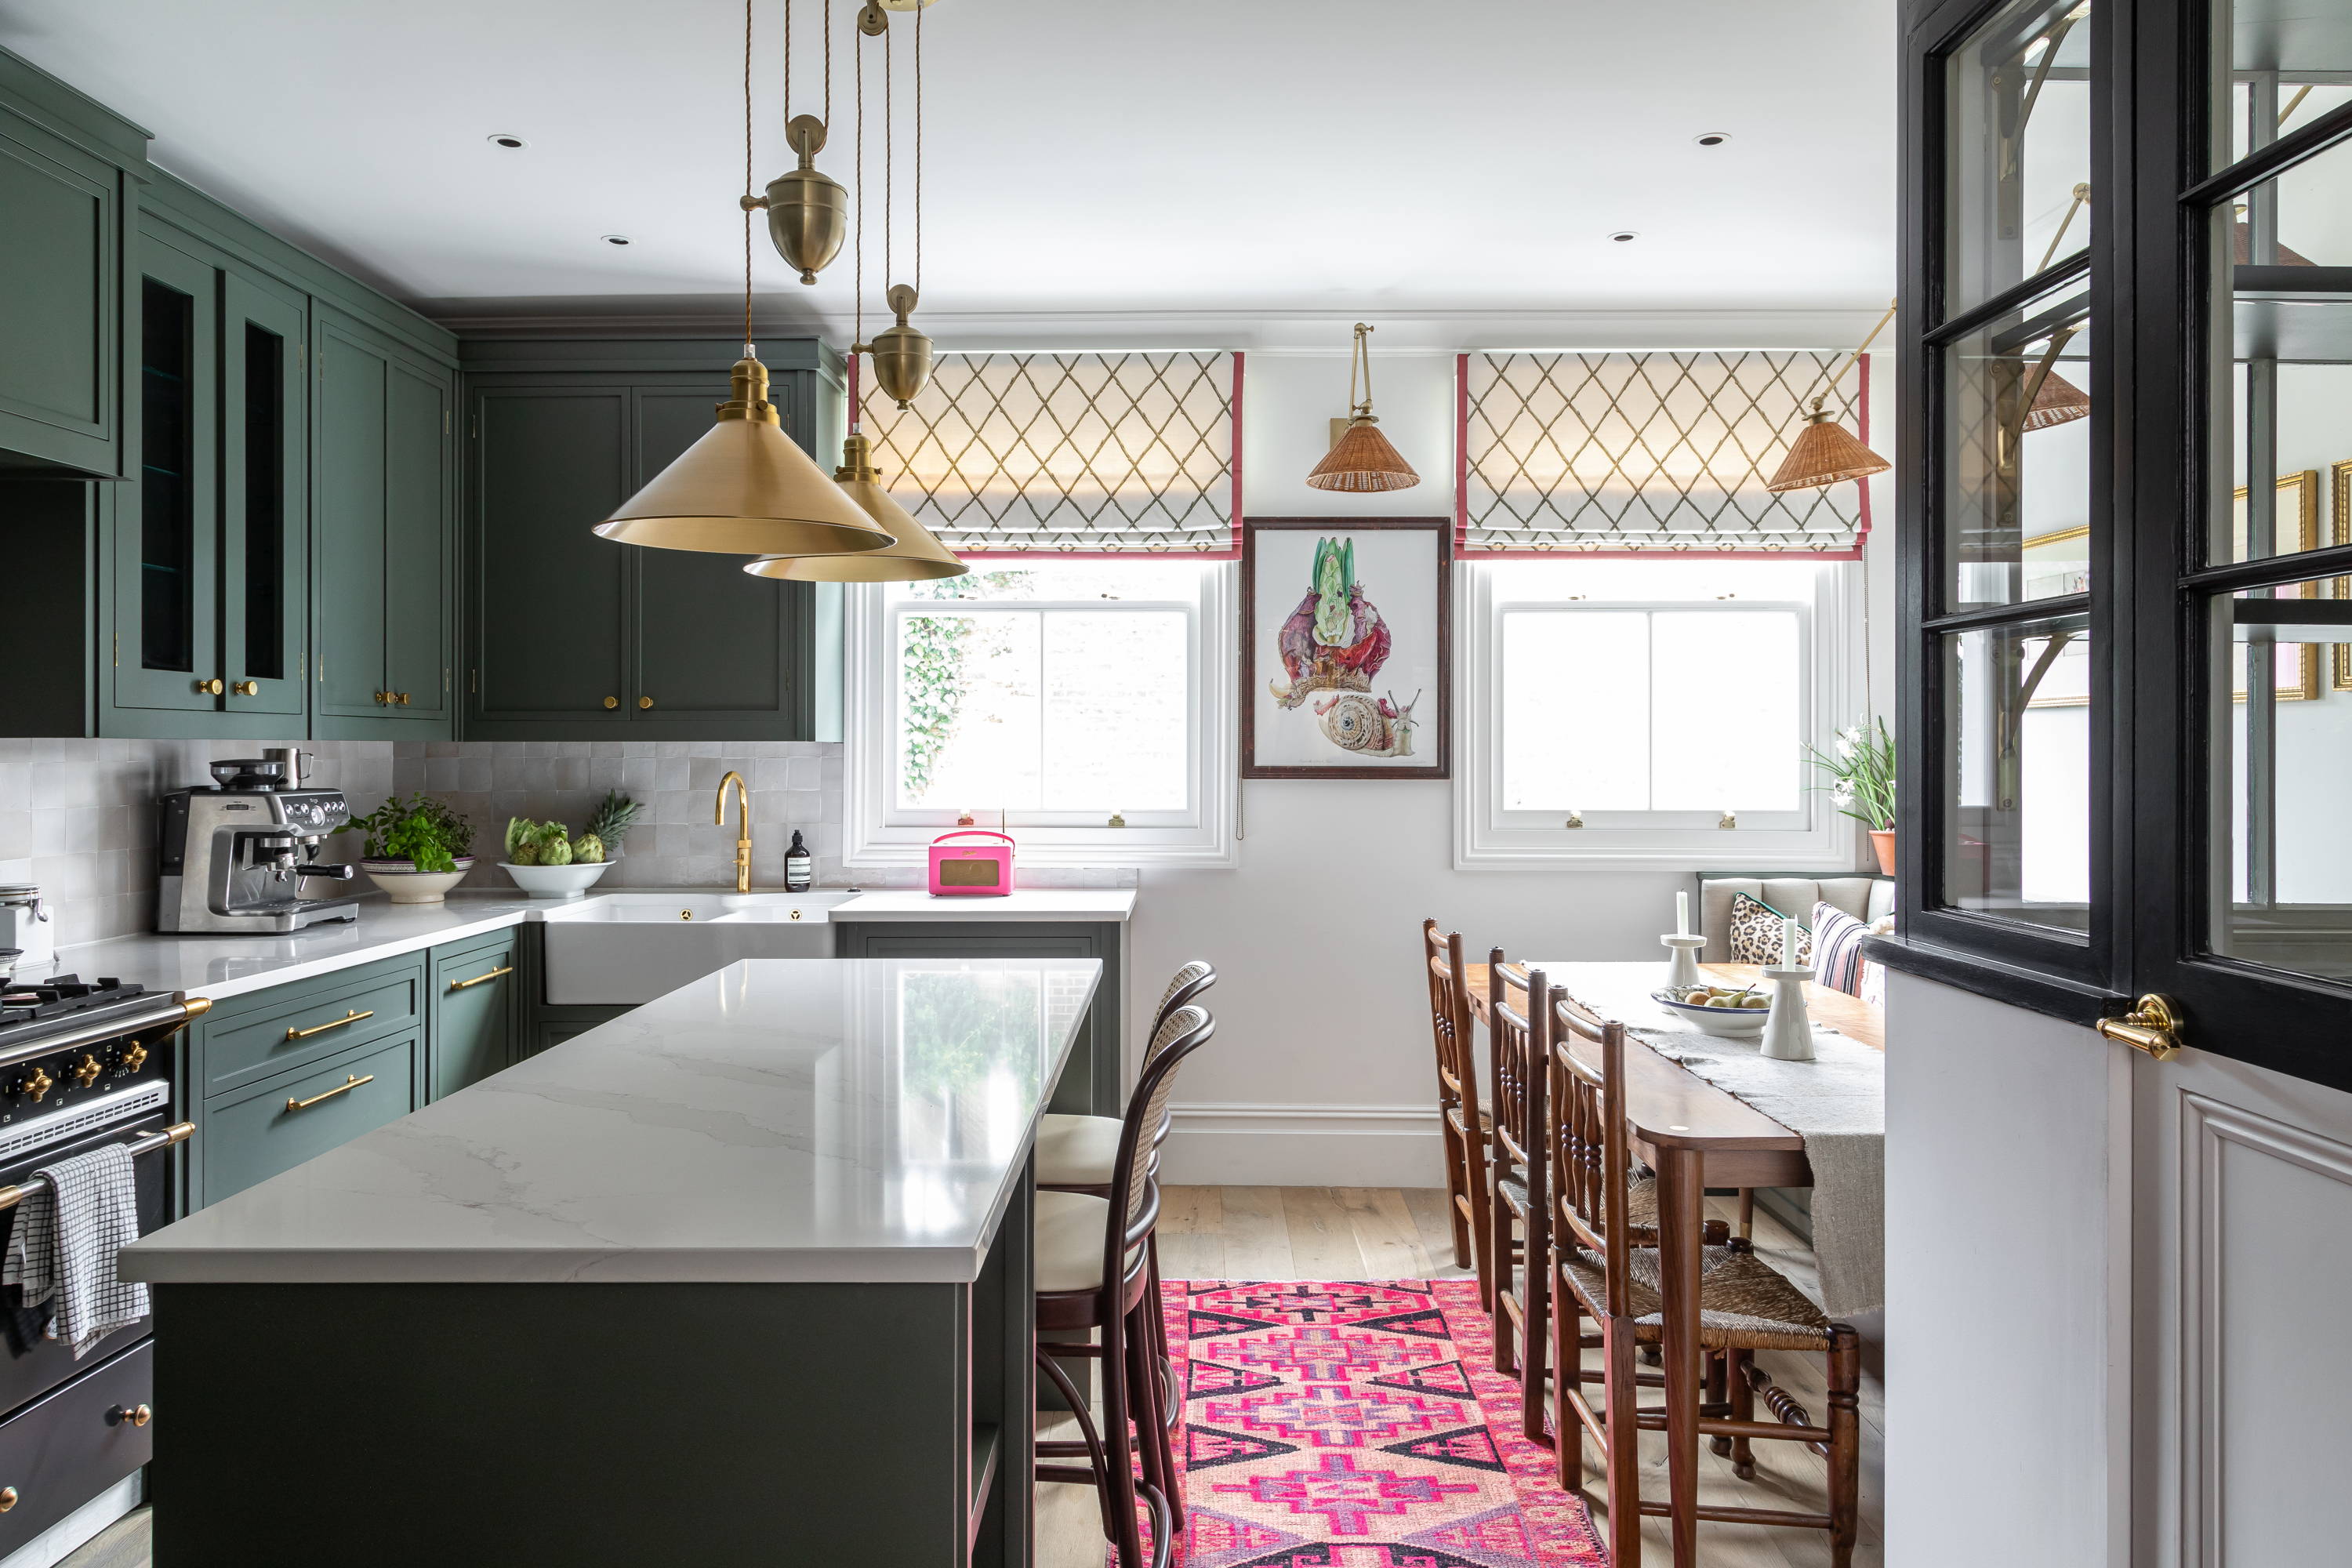 Emerald Green: 3 Ways to Use the Color of the Year in the Kitchen